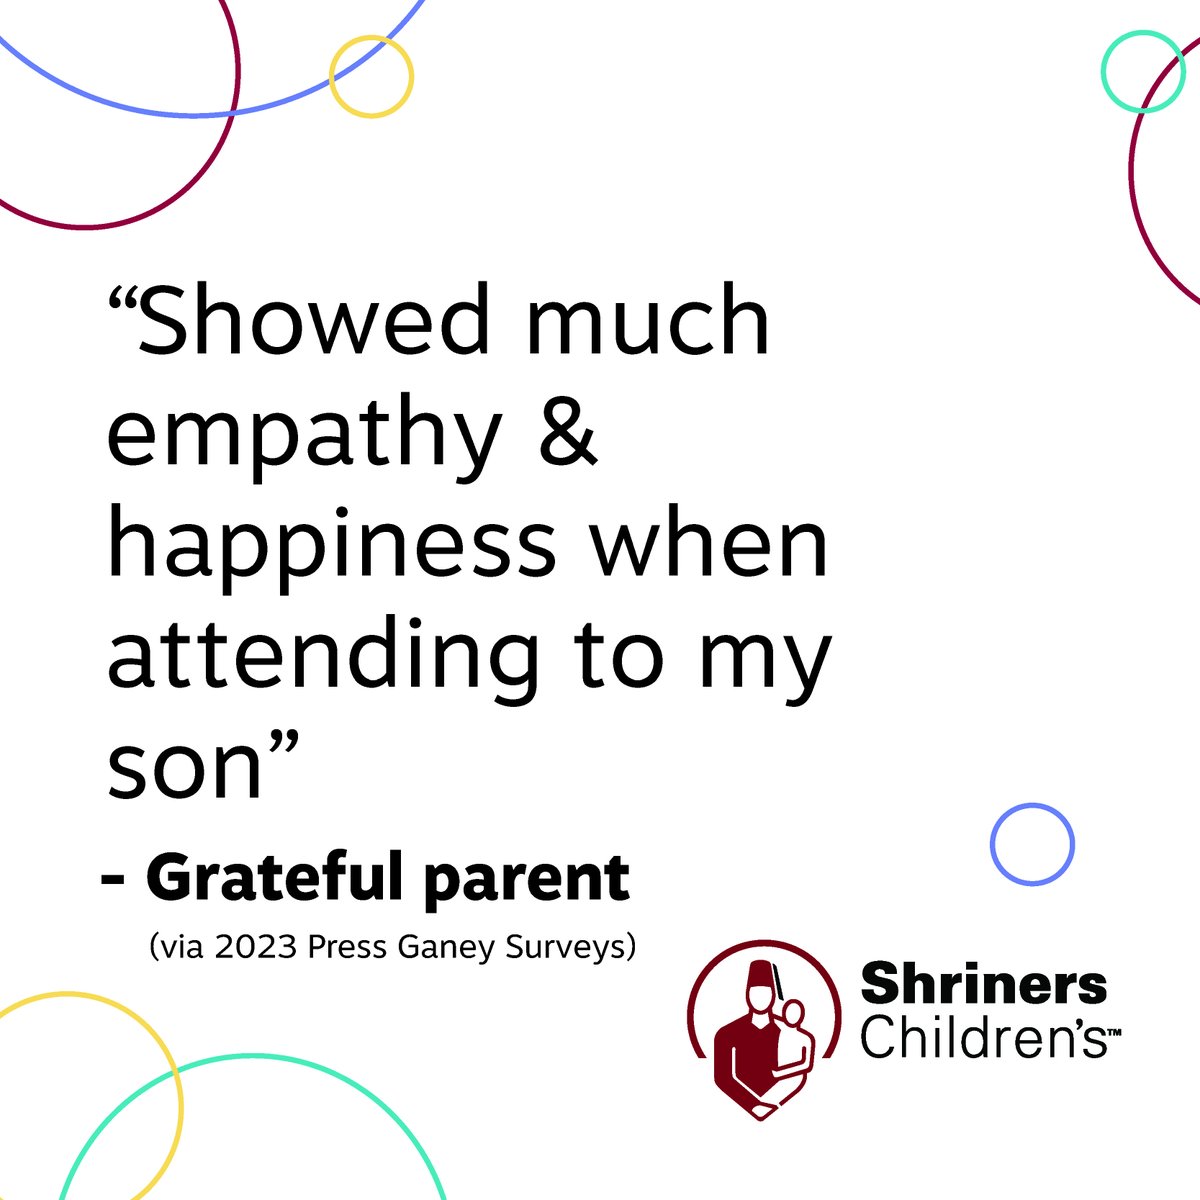 What our grateful parents have to say when surveyed...
#FeelGoodFriday #ShrinersChildrens #PediatricOrthopedics #PressGaneyComments